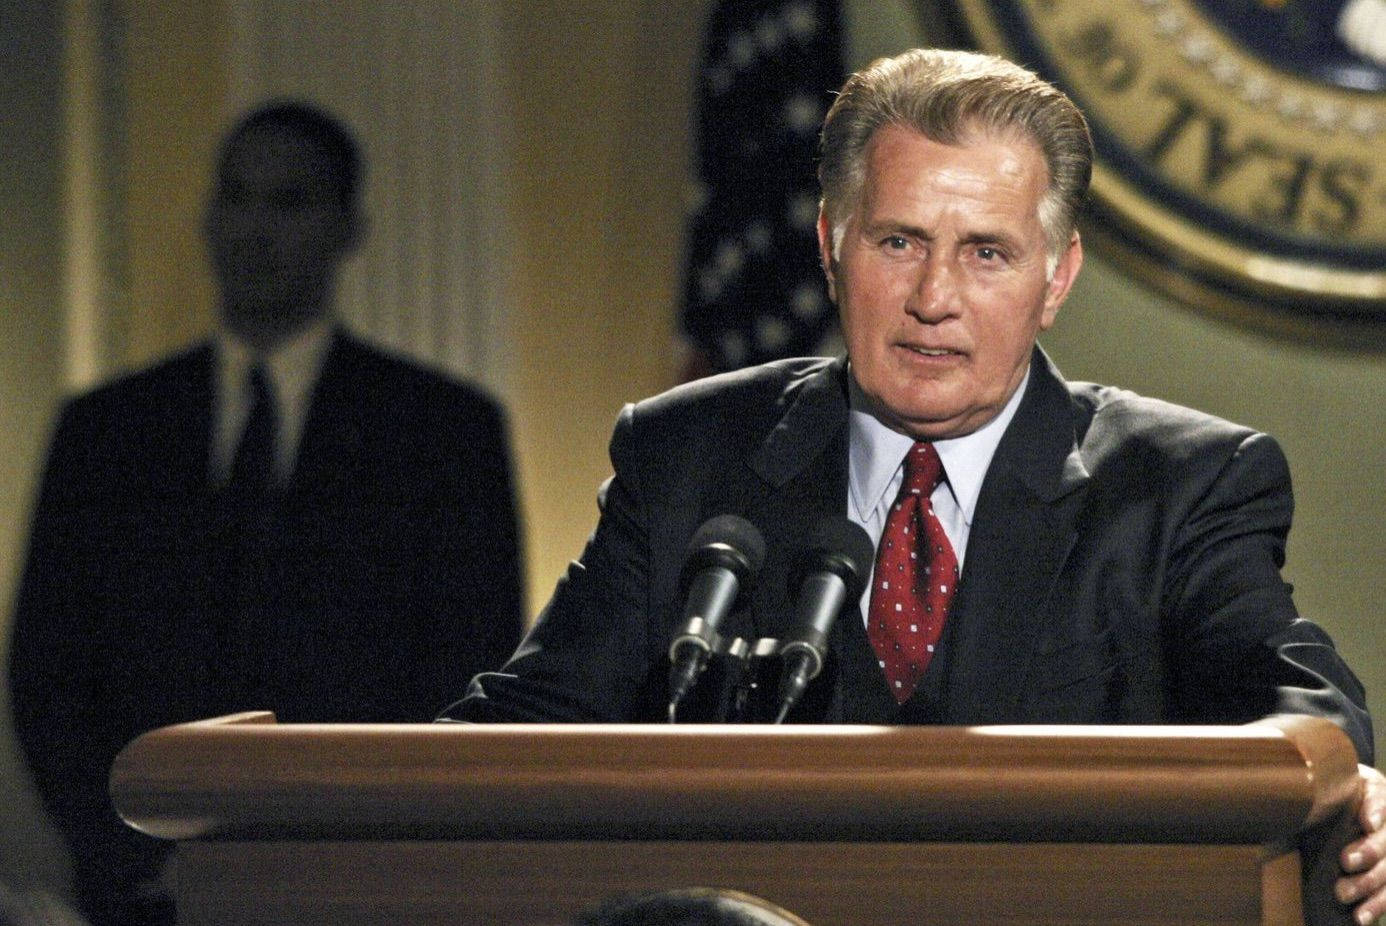 Hollywood Legend Martin Sheen in a Scene from 'The West Wing' Wallpaper